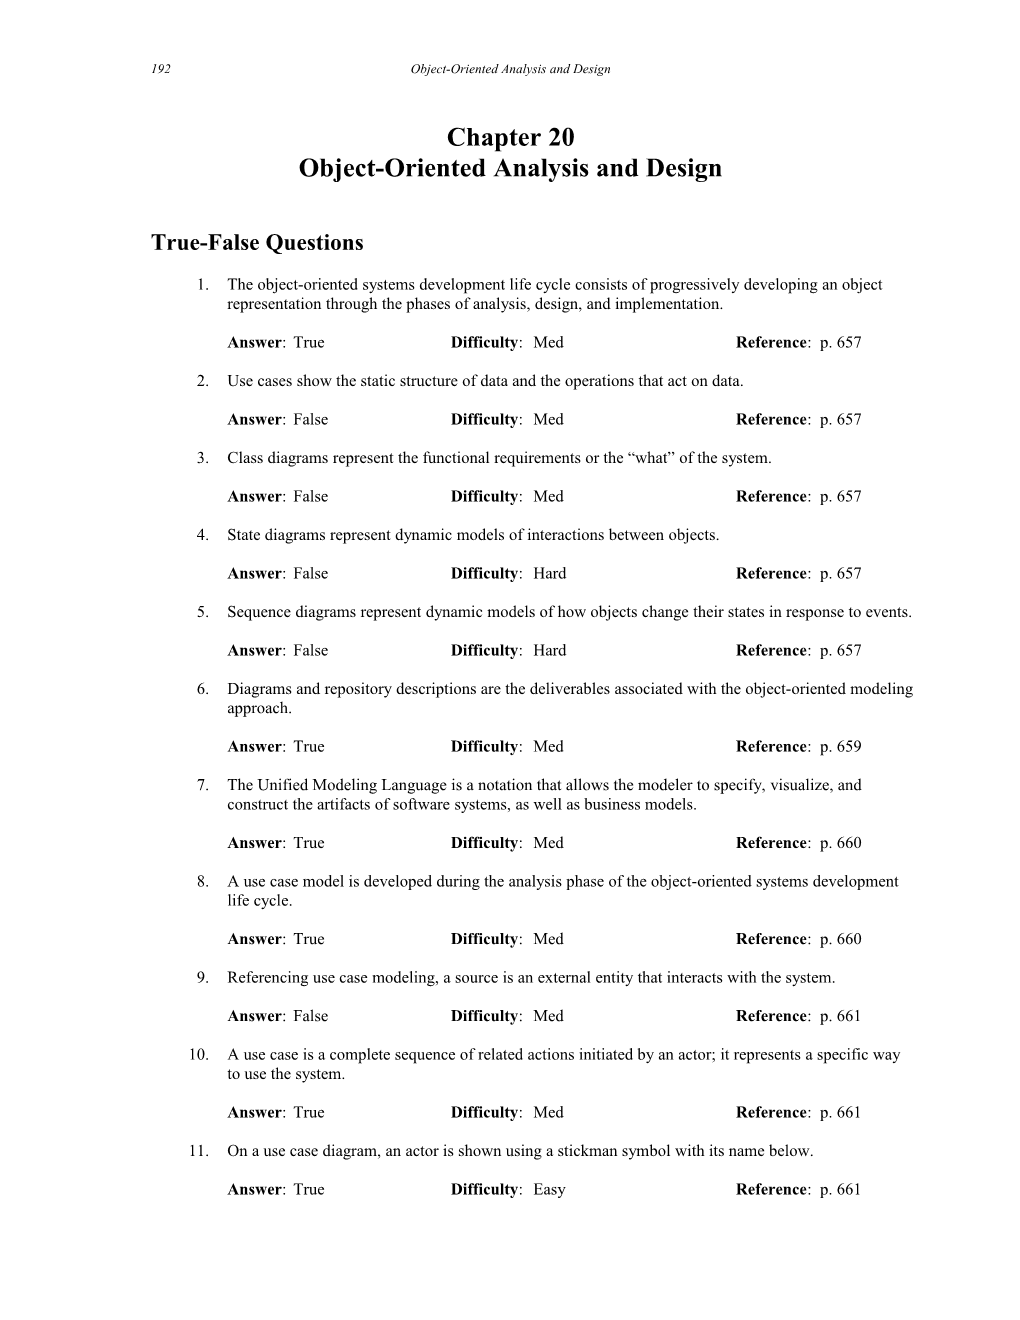 Chapter 20Object-Oriented Analysis and Design1